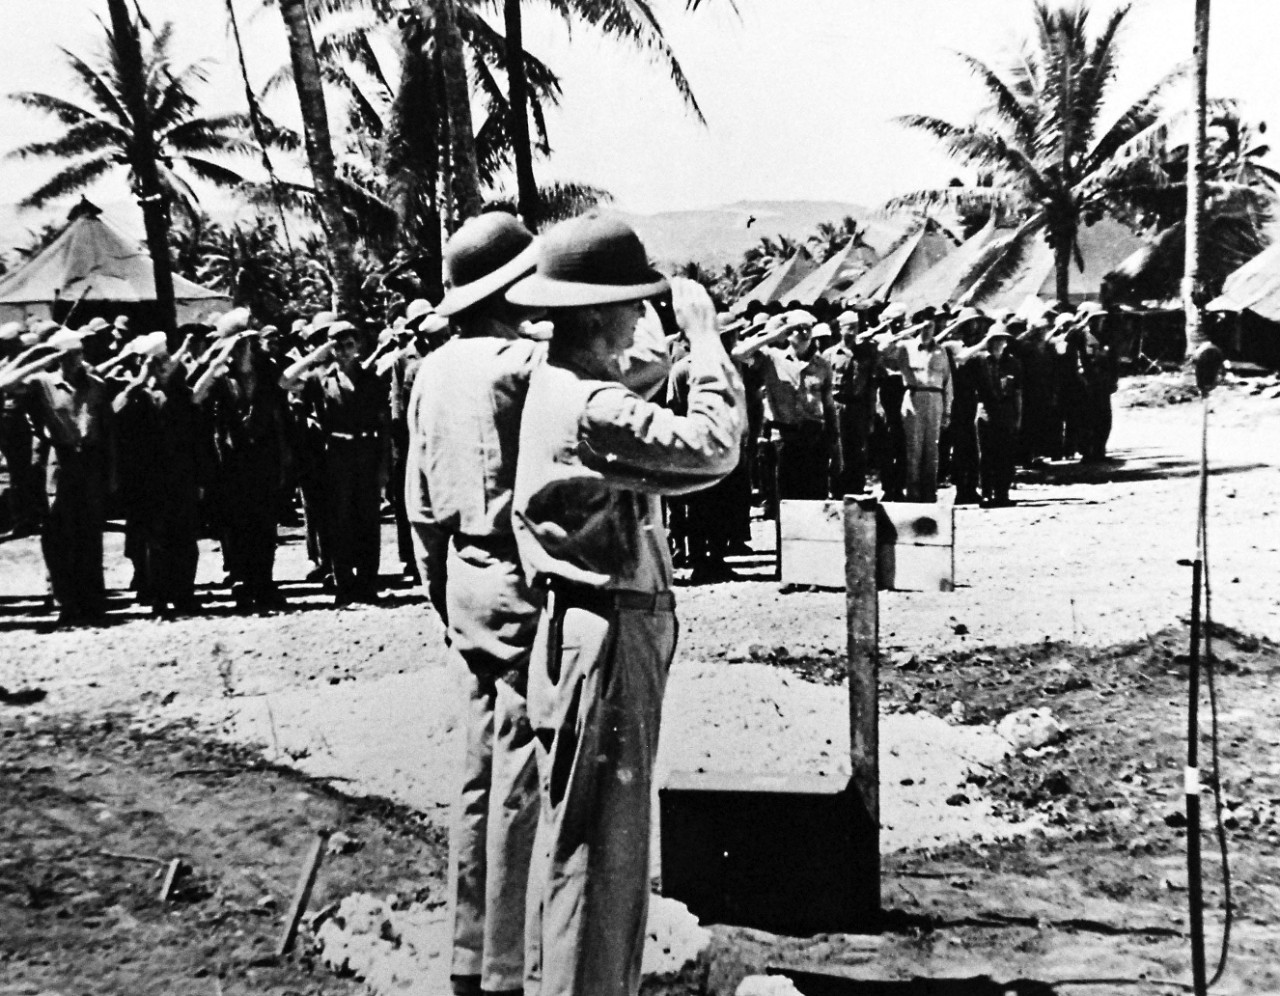 80-G-49595:  Okinawa Campaign, April-June 1945.  In foreground, commanding officer Captain J.M.C. Gordan and executive officer Commander E.F. Evans, MC, at formal flag raising ceremony on Okinawa during construction operations.    Photograph received June 29, 1945.   Official U.S. Navy photograph, now in the collections of the National Archives.  (2017/01/10).